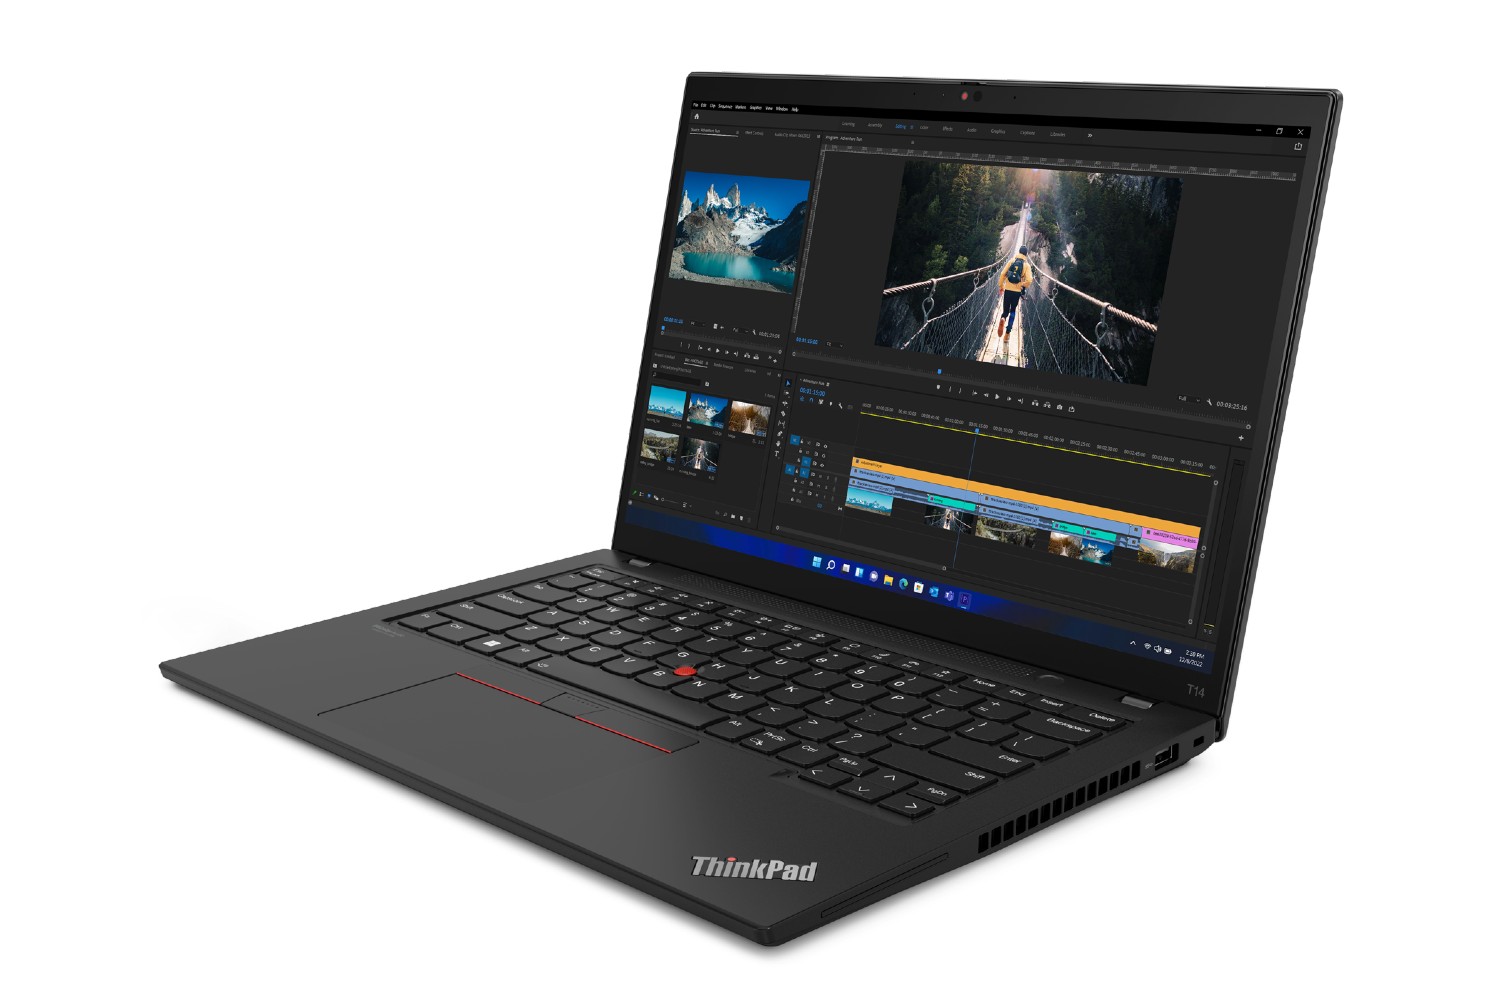 This Lenovo ThinkPad laptop is more than 50% off — save over $1,200!